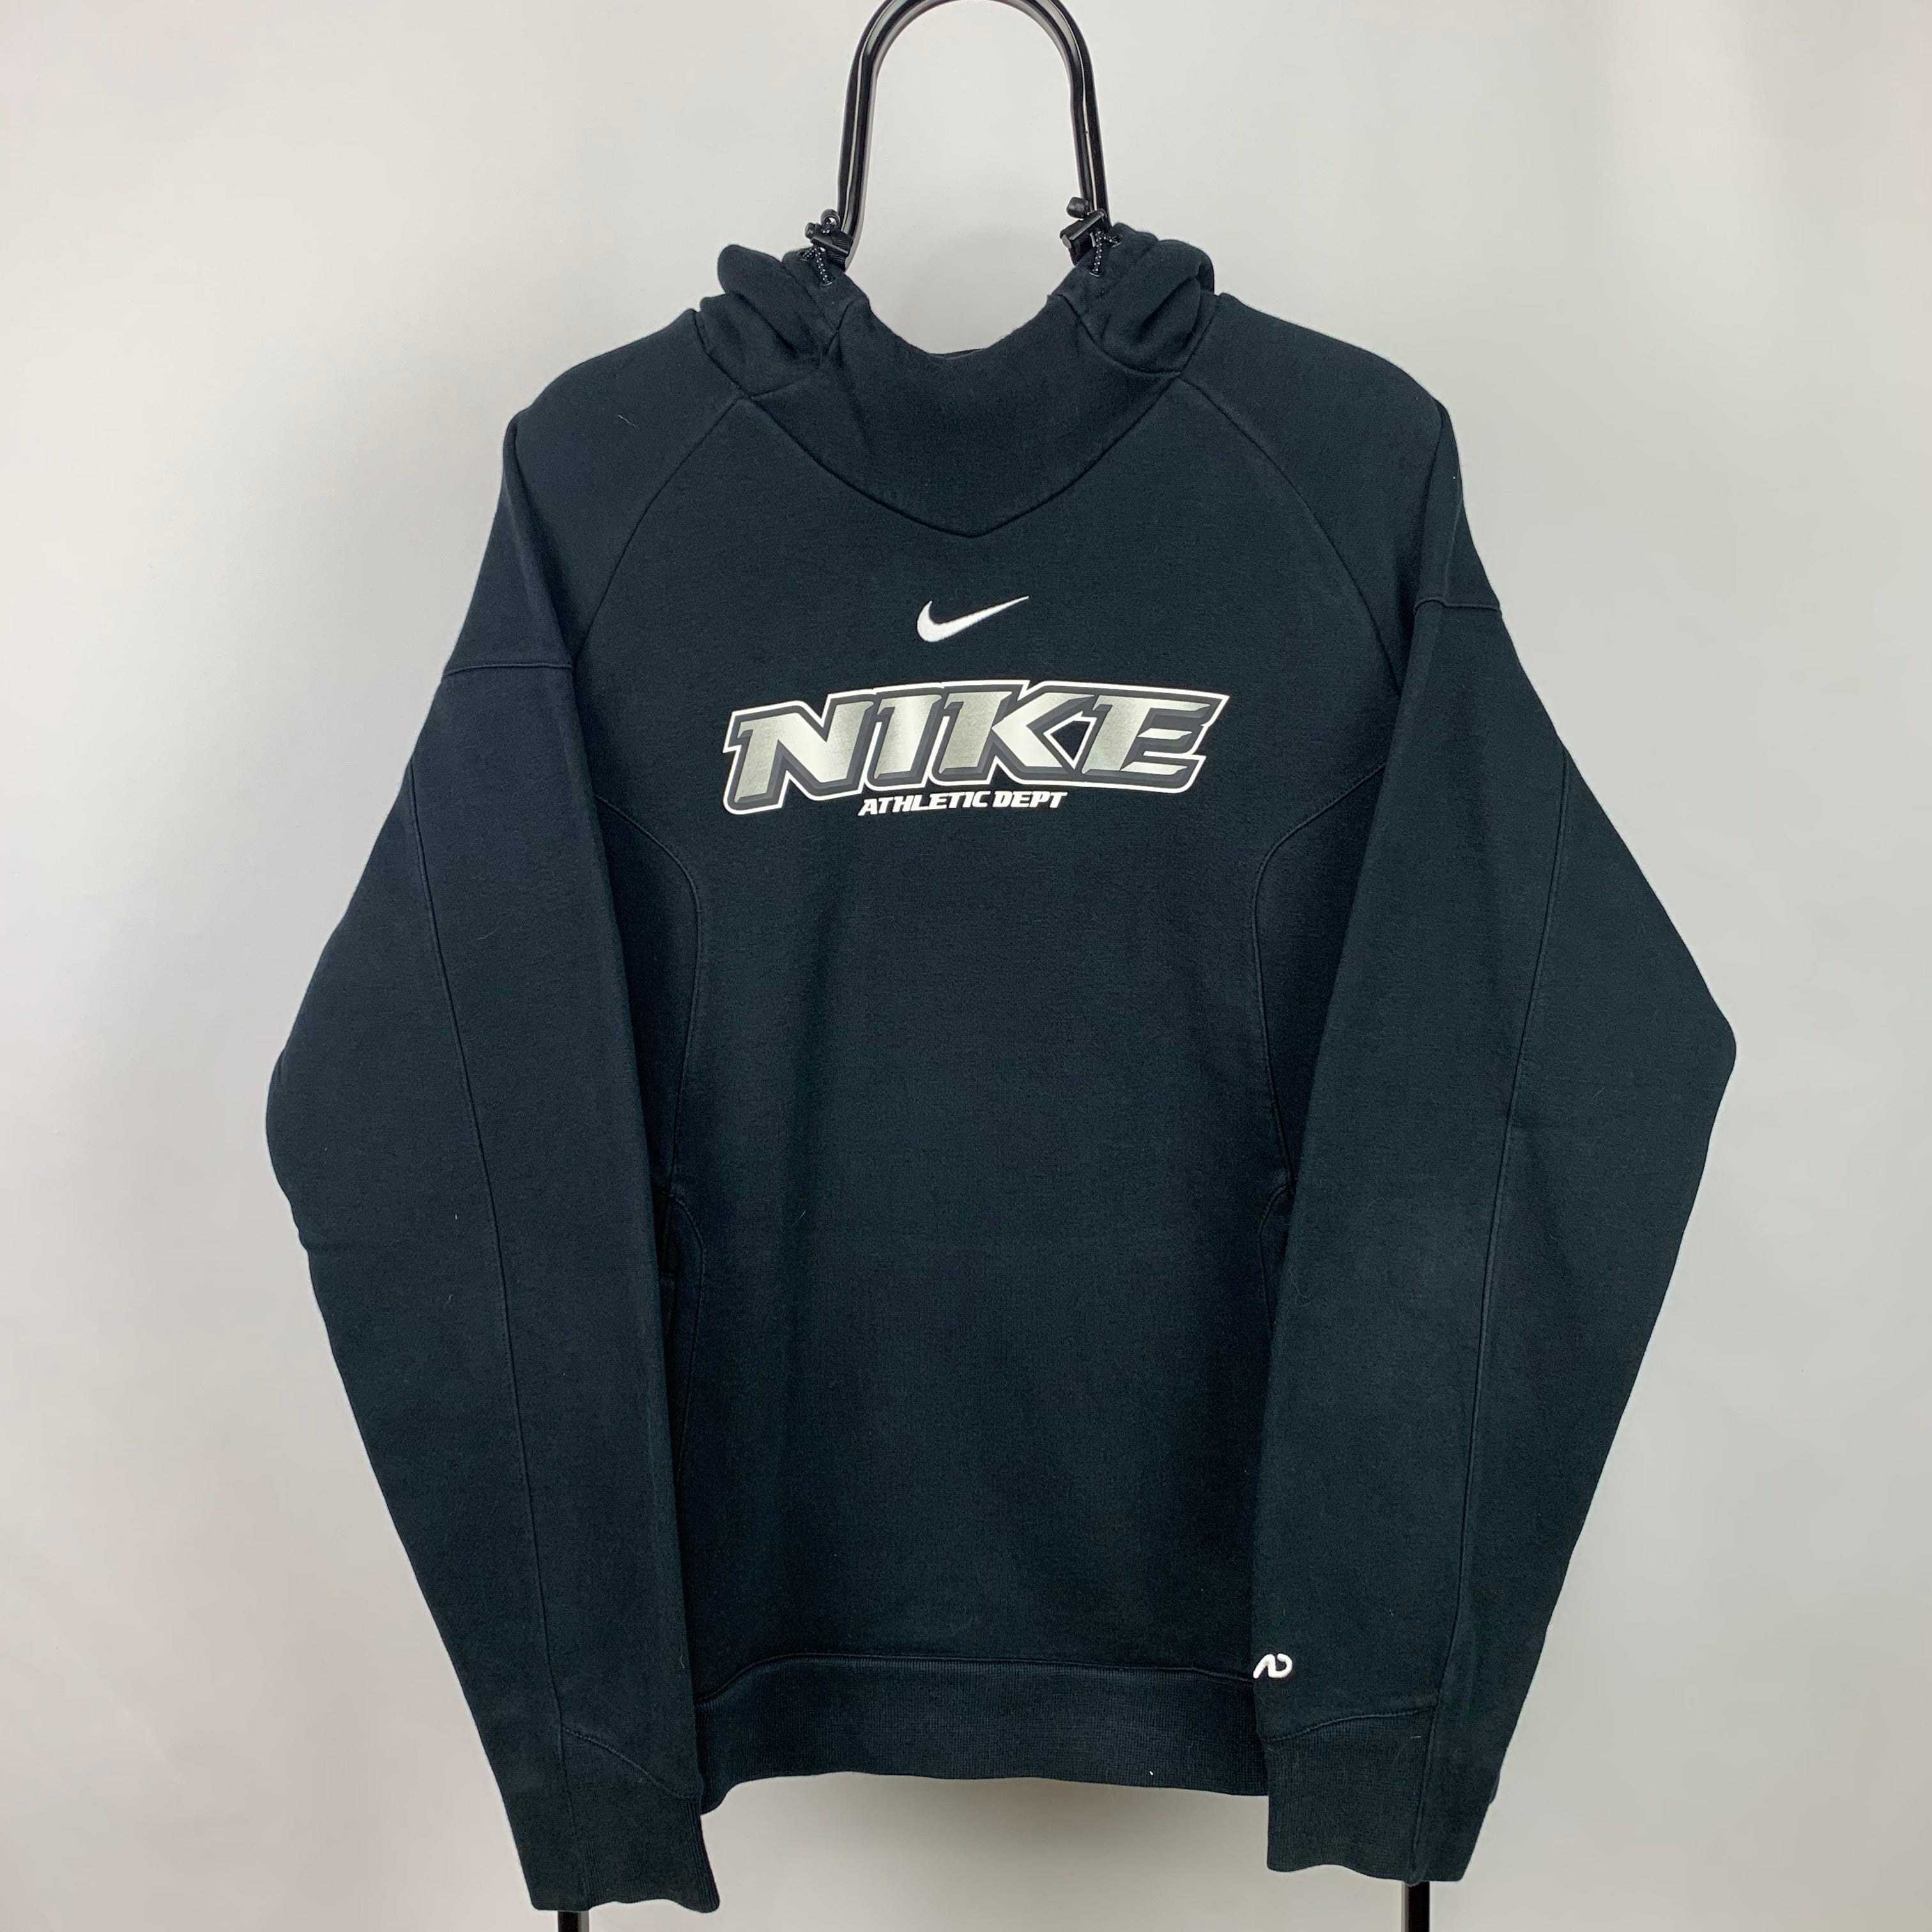 Nike Spellout Embroidered Centre Swoosh Hoodie in Black - Men's Medium ...